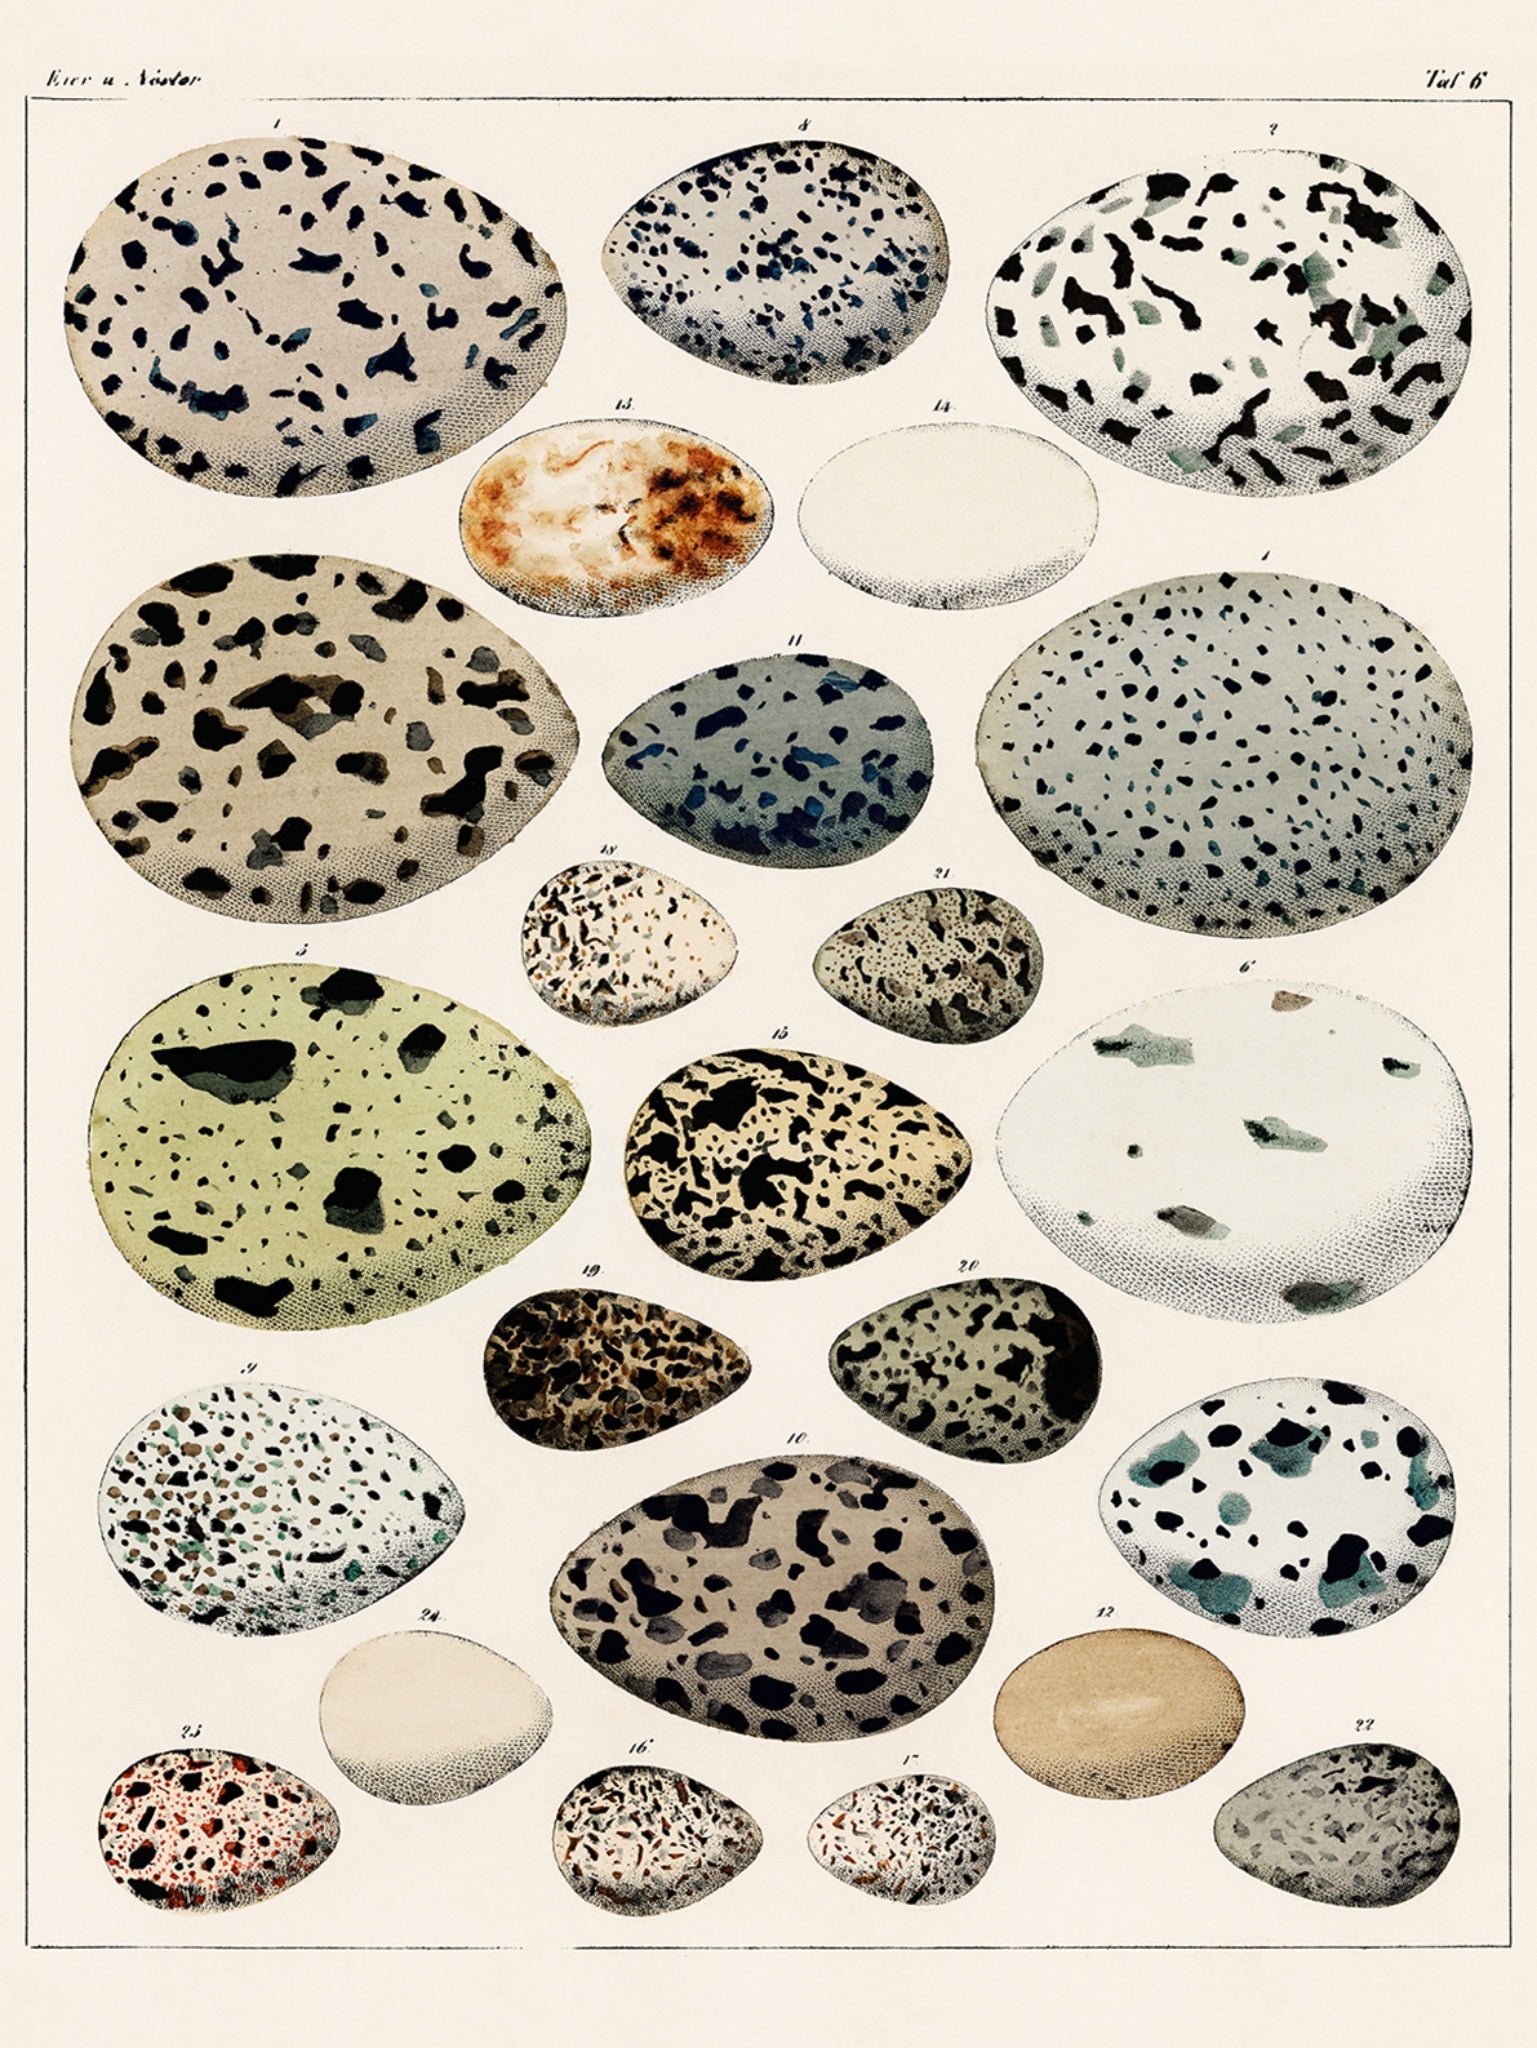 An illustration showing a variety of different eggs from different birds poster artwork print